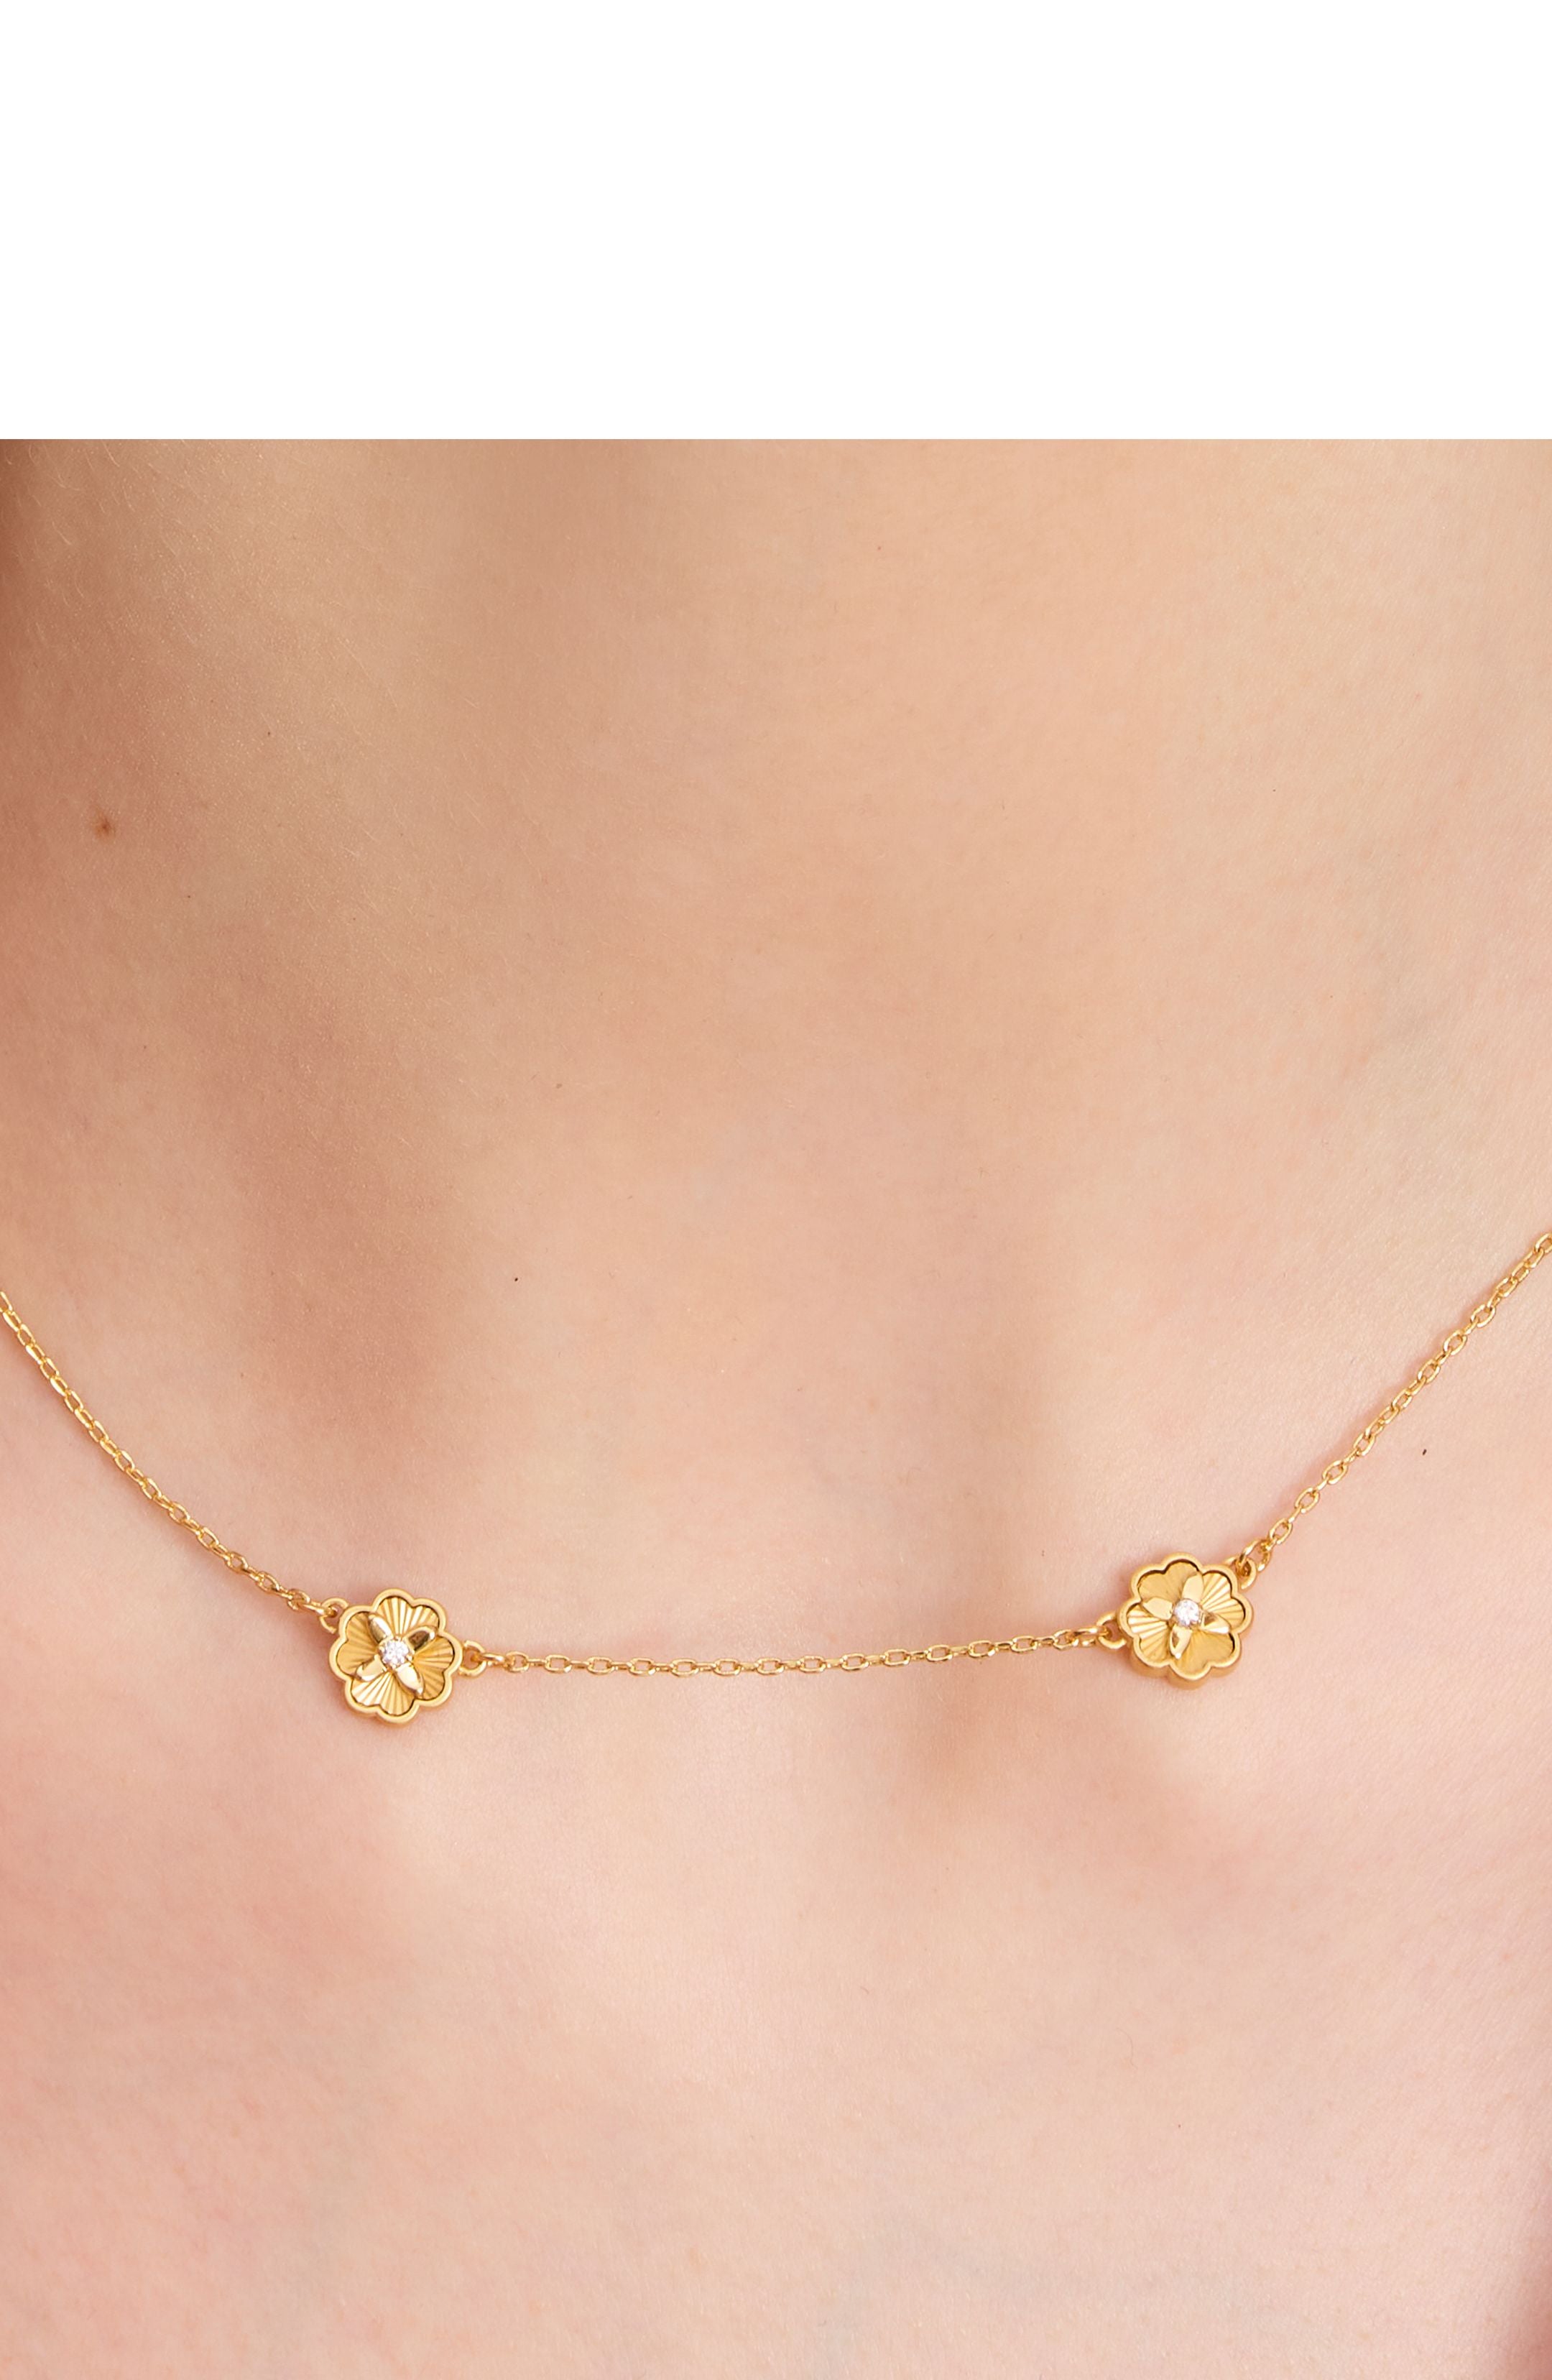 KG326-STION NECKLACE-Clear/Gold